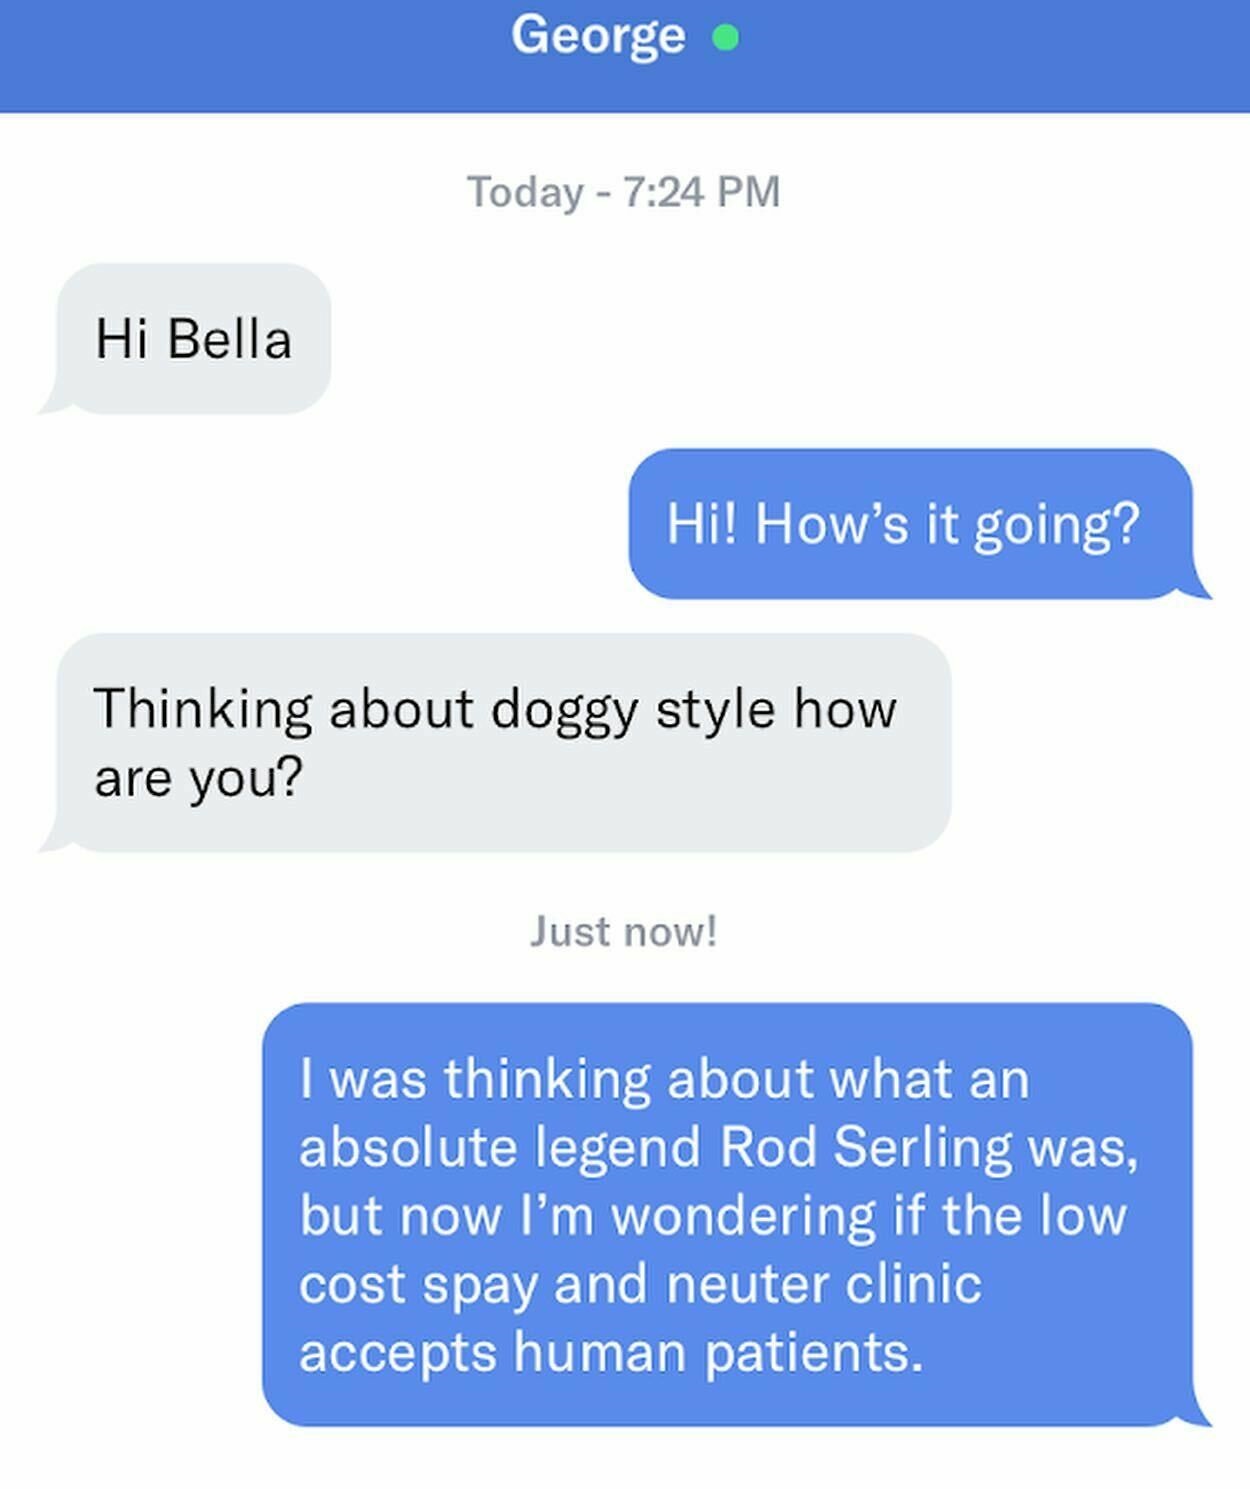 Creepy Messages - number - George Today Hi Bella Hi! How's it going? Thinking about doggy style how are you? Just now! I was thinking about what an absolute legend Rod Serling was, but now I'm wondering if the low cost spay and neuter clinic accepts human